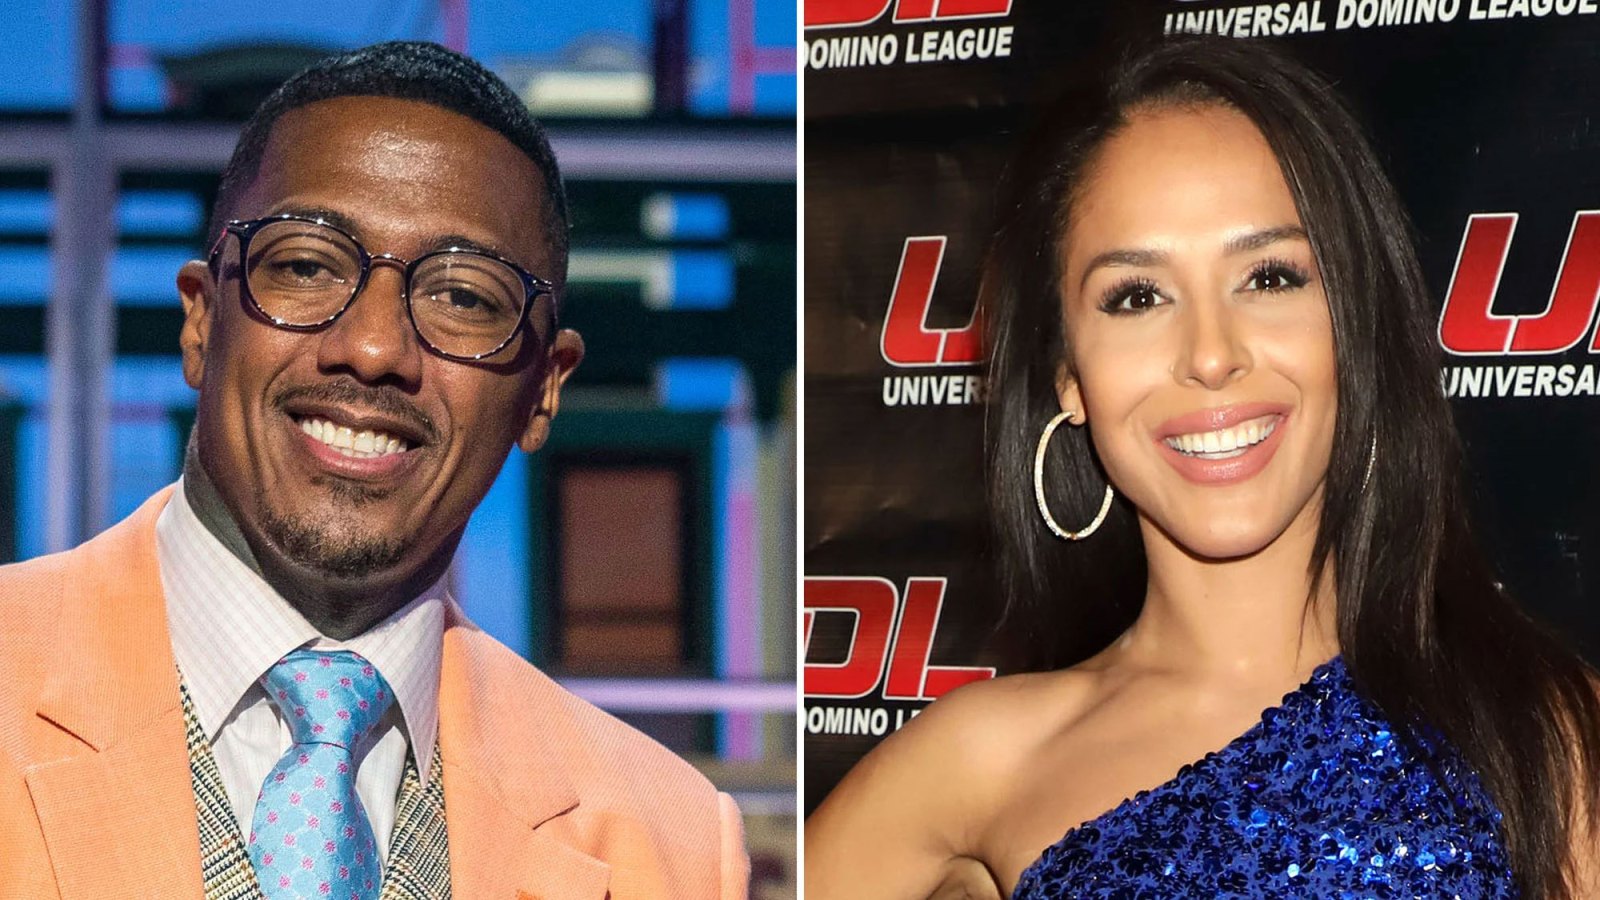 Nick Cannon and Brittany Bell Expecting Baby No. 3 Together